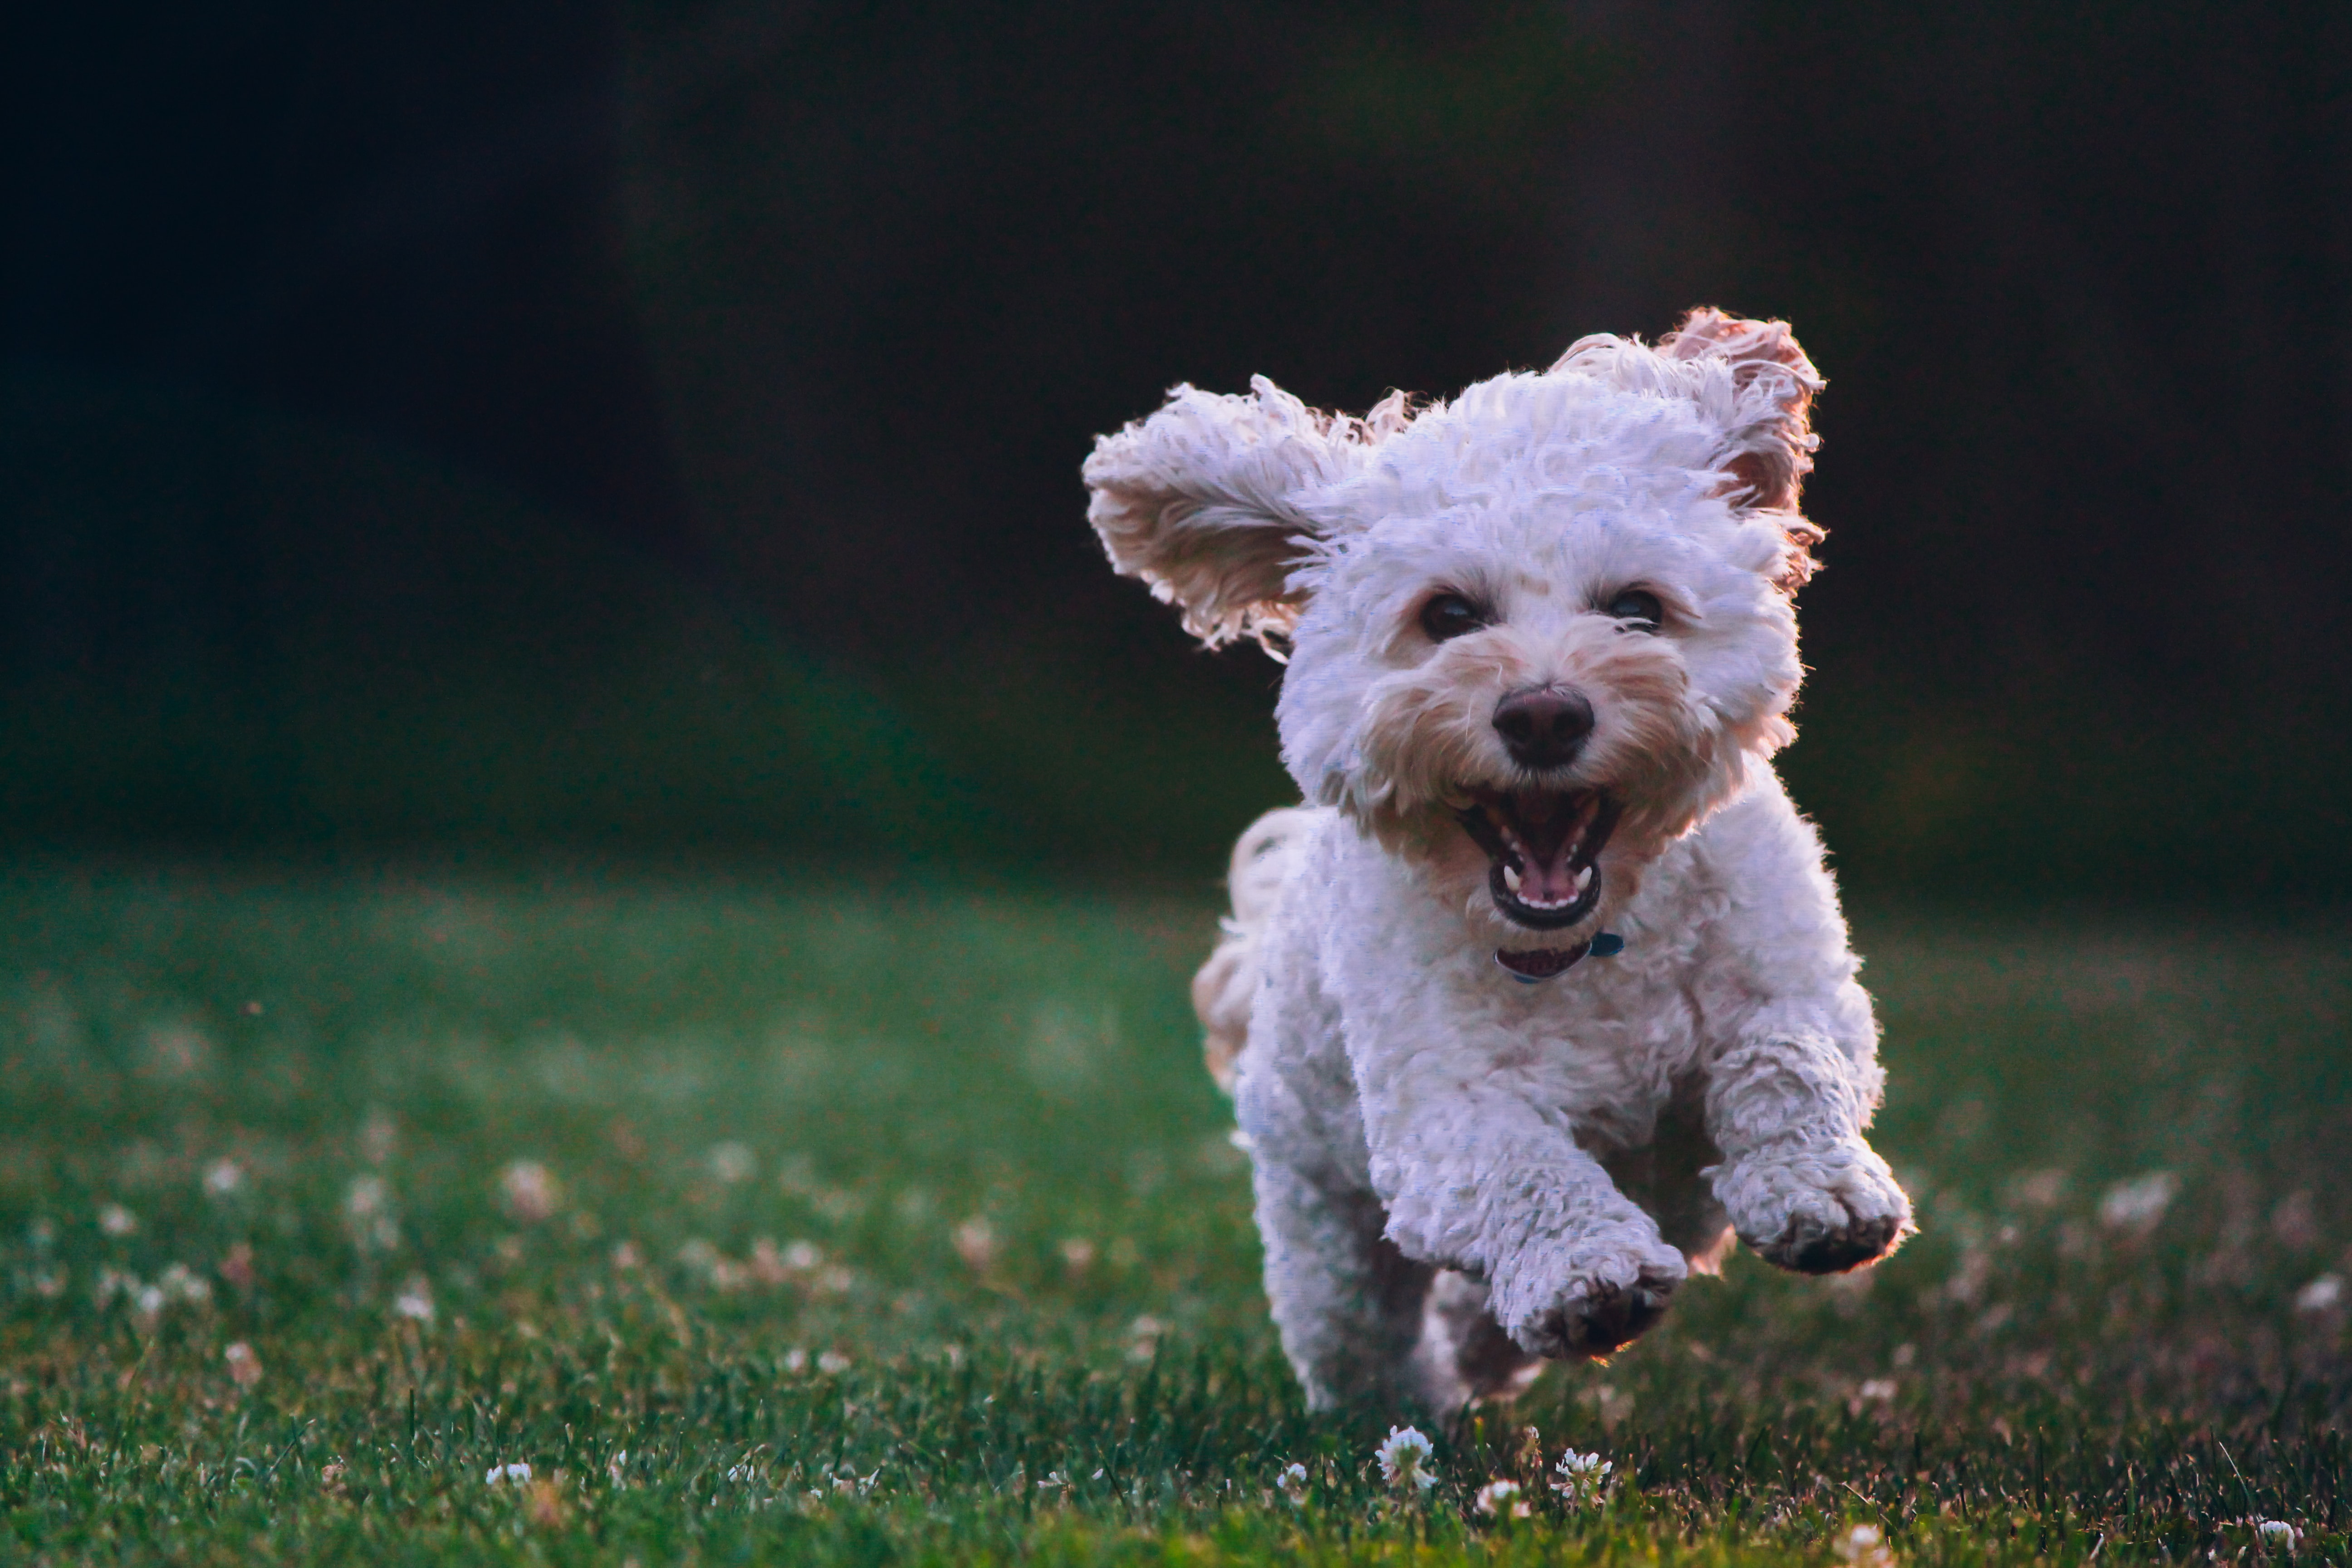 A dog running in a field